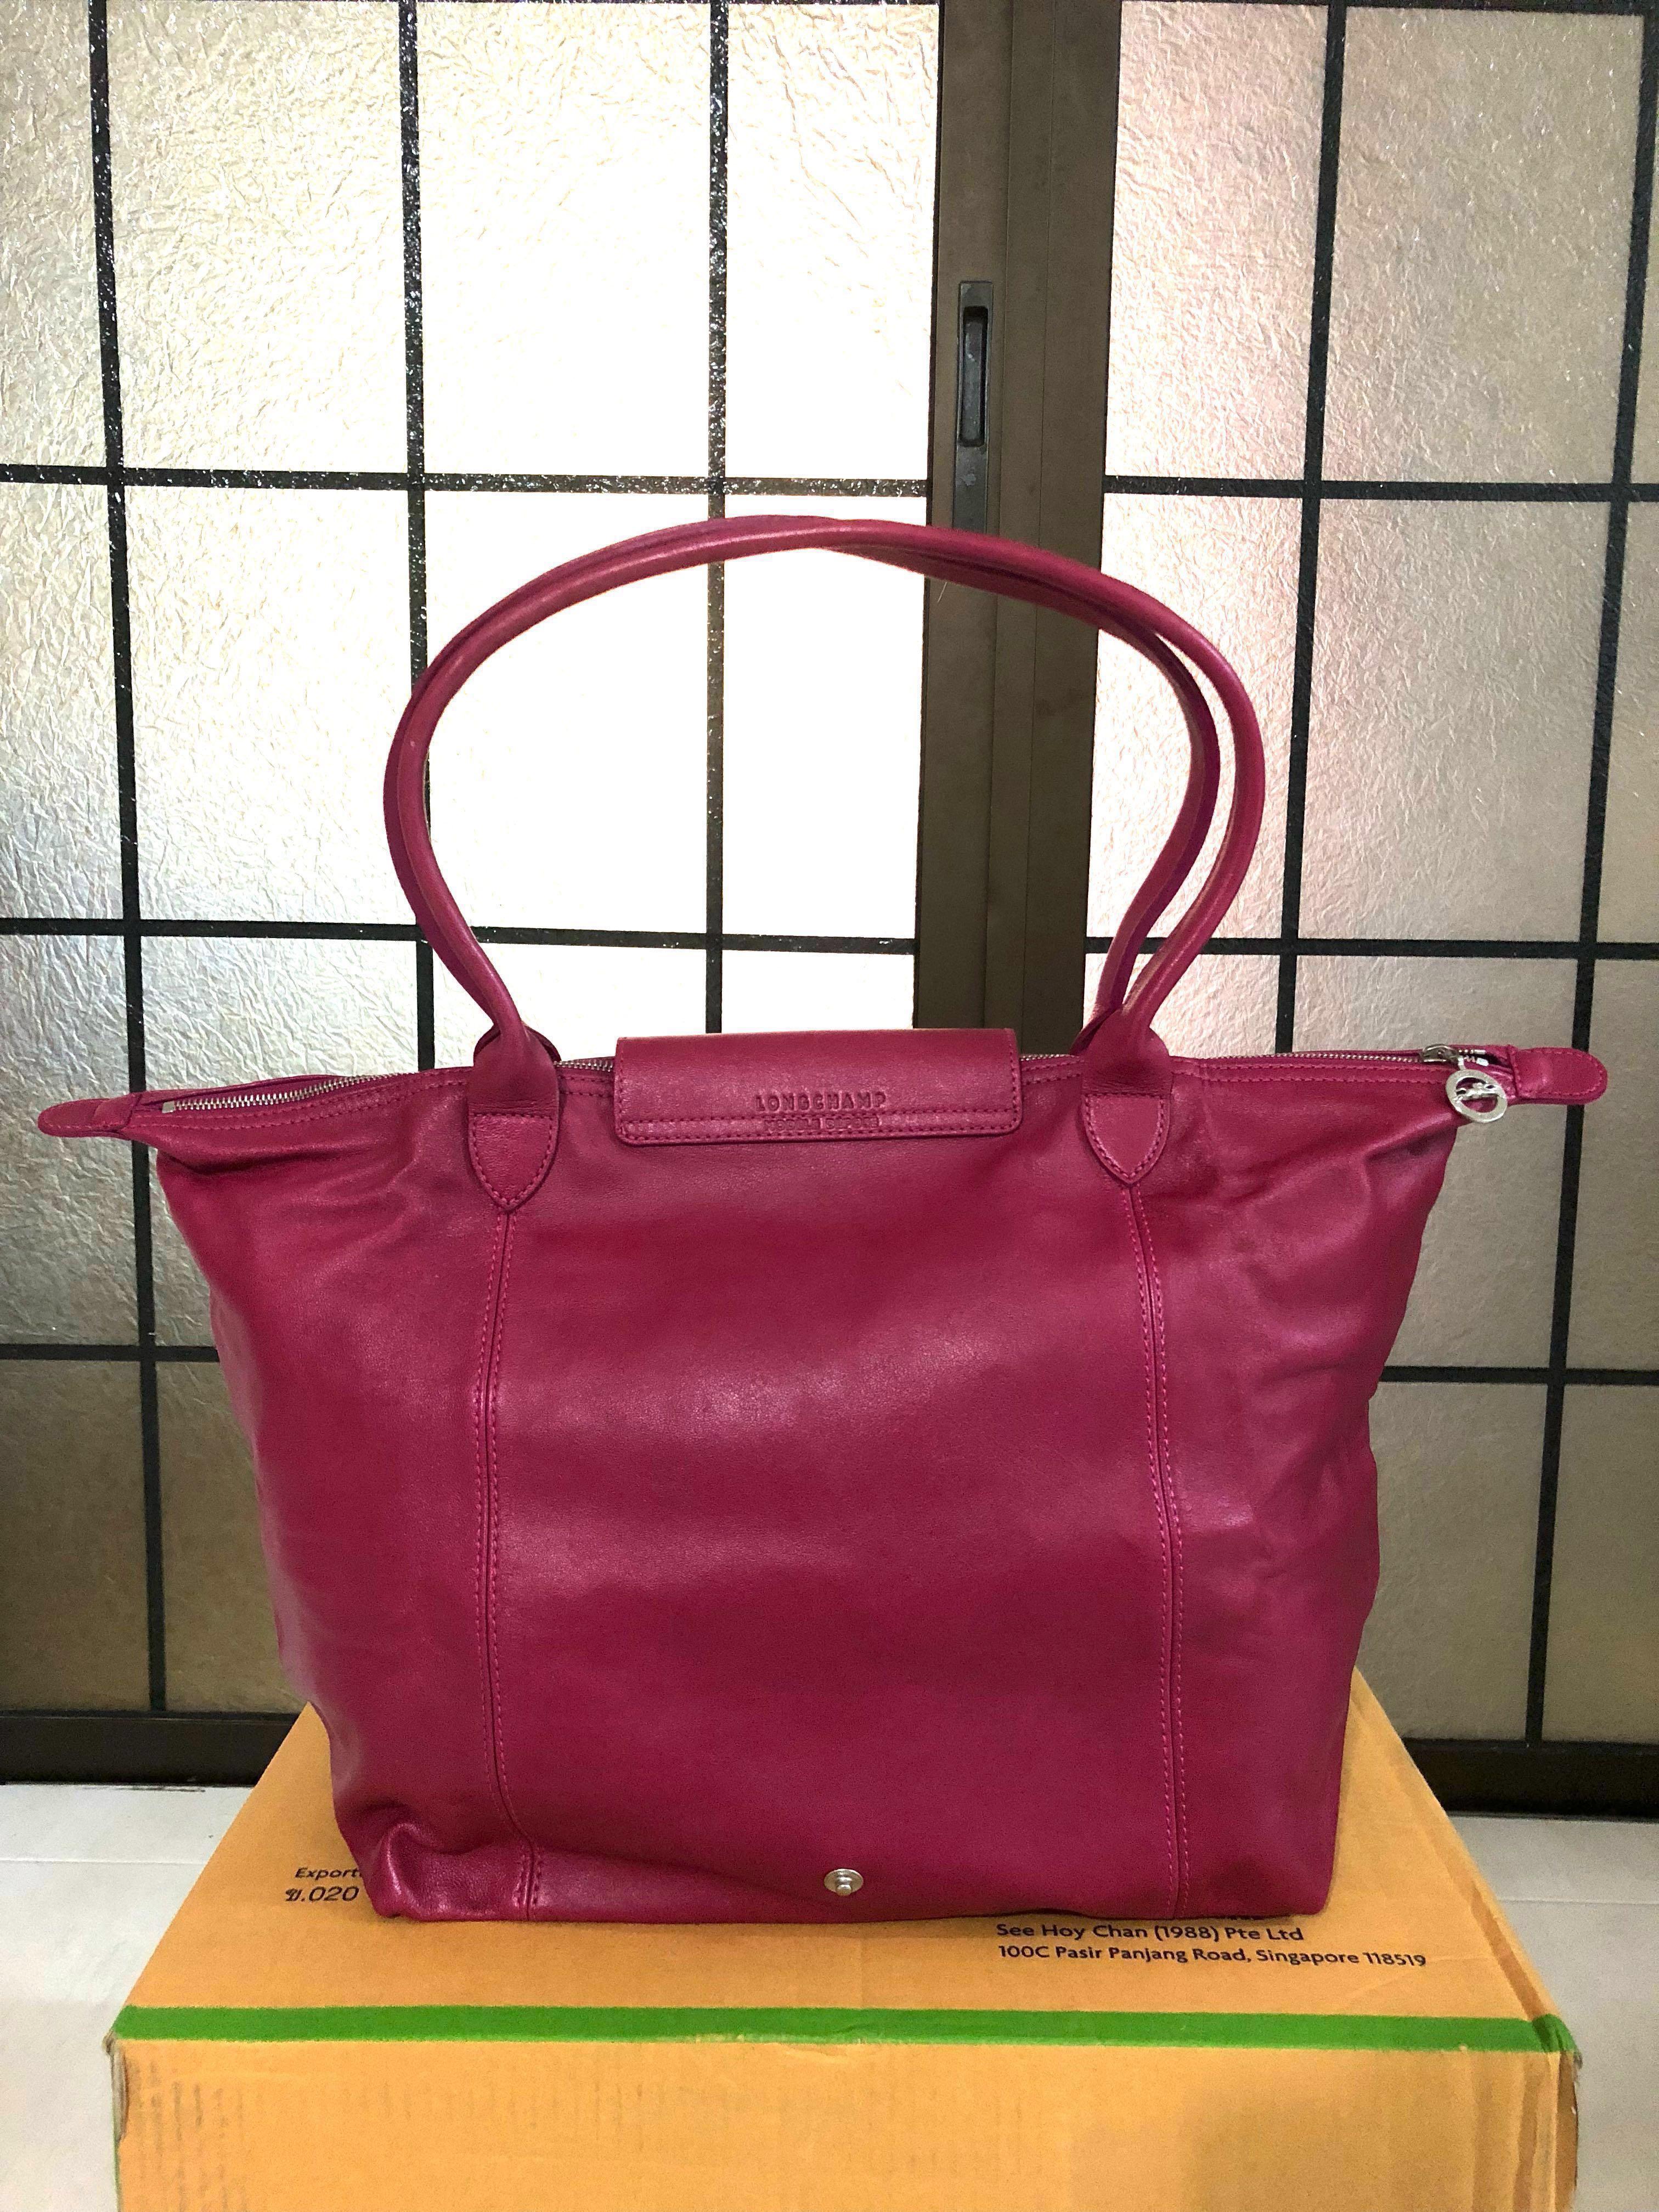 LONGCHAMP Small Le Pliage Cuir Red Leather Top Handle Bag Women’s New $565